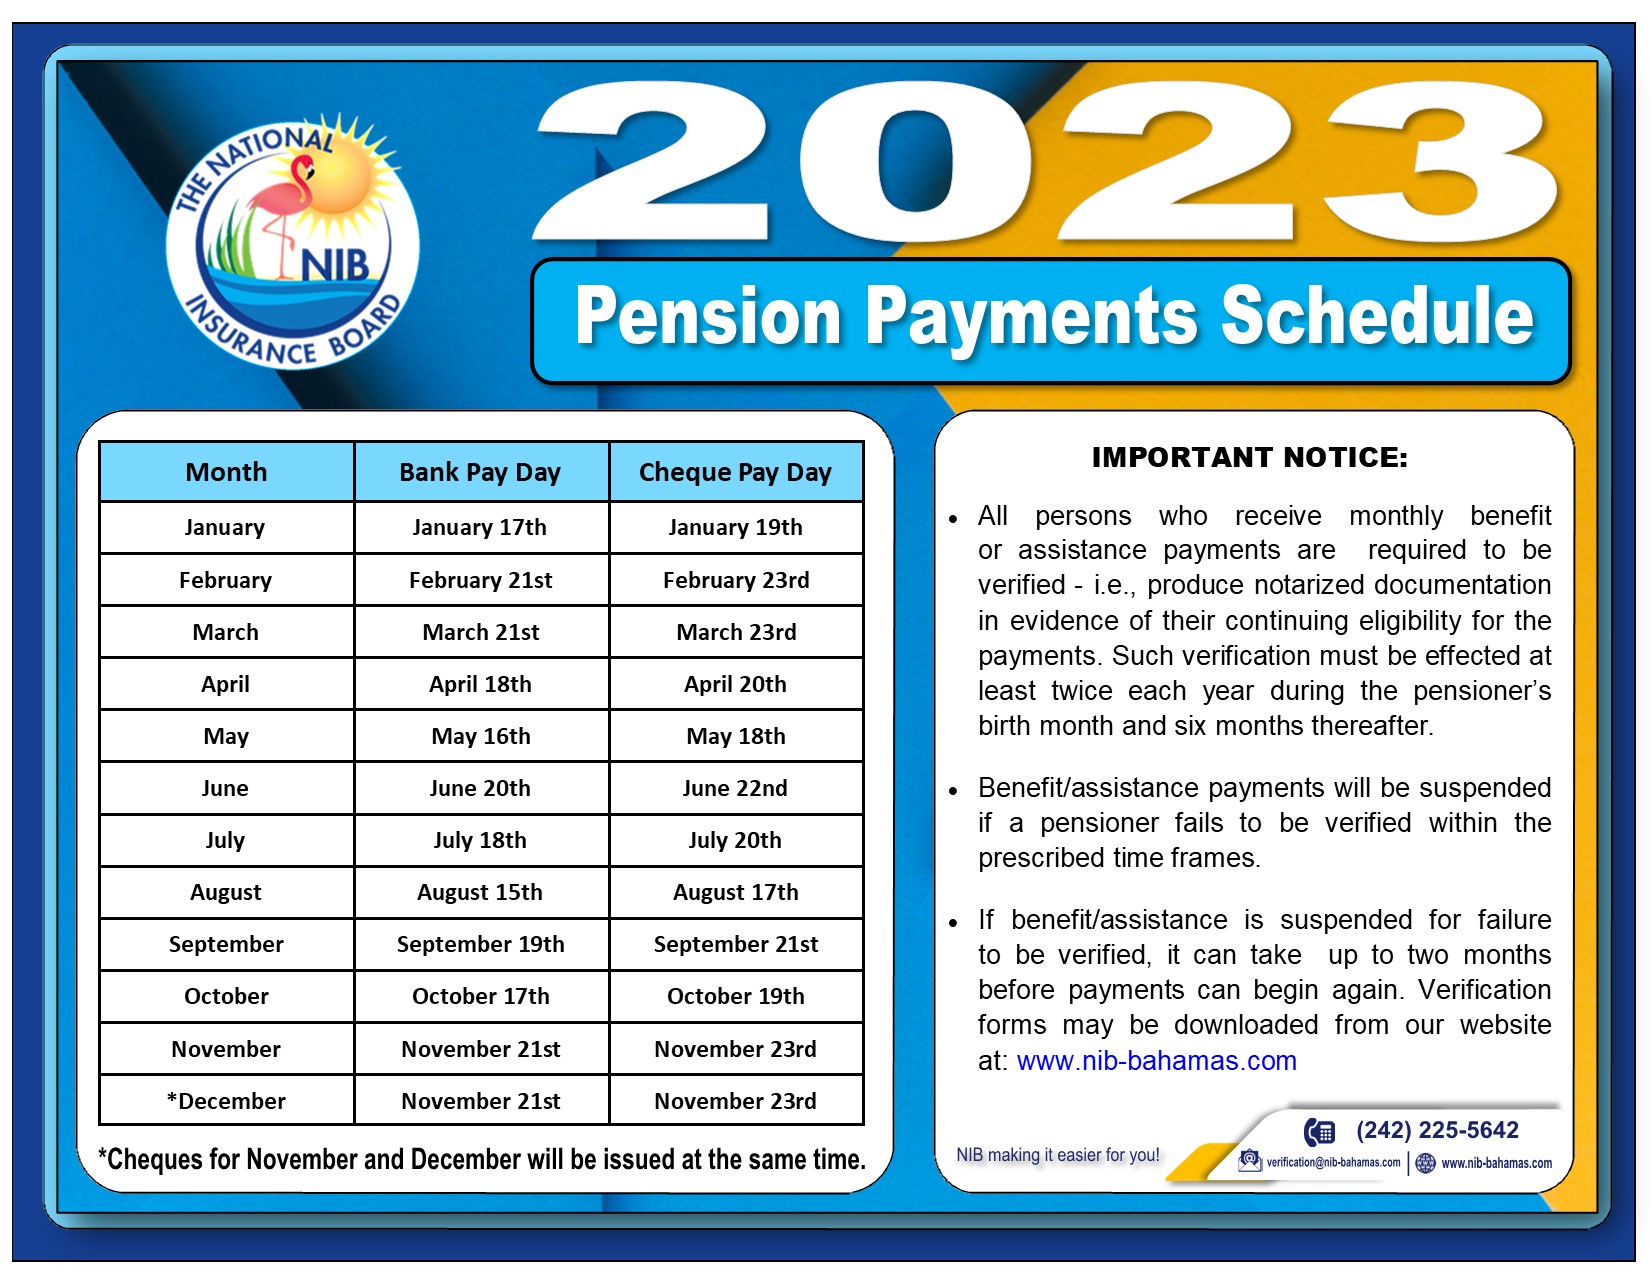 NIB News 2023 Pension Payments Schedule